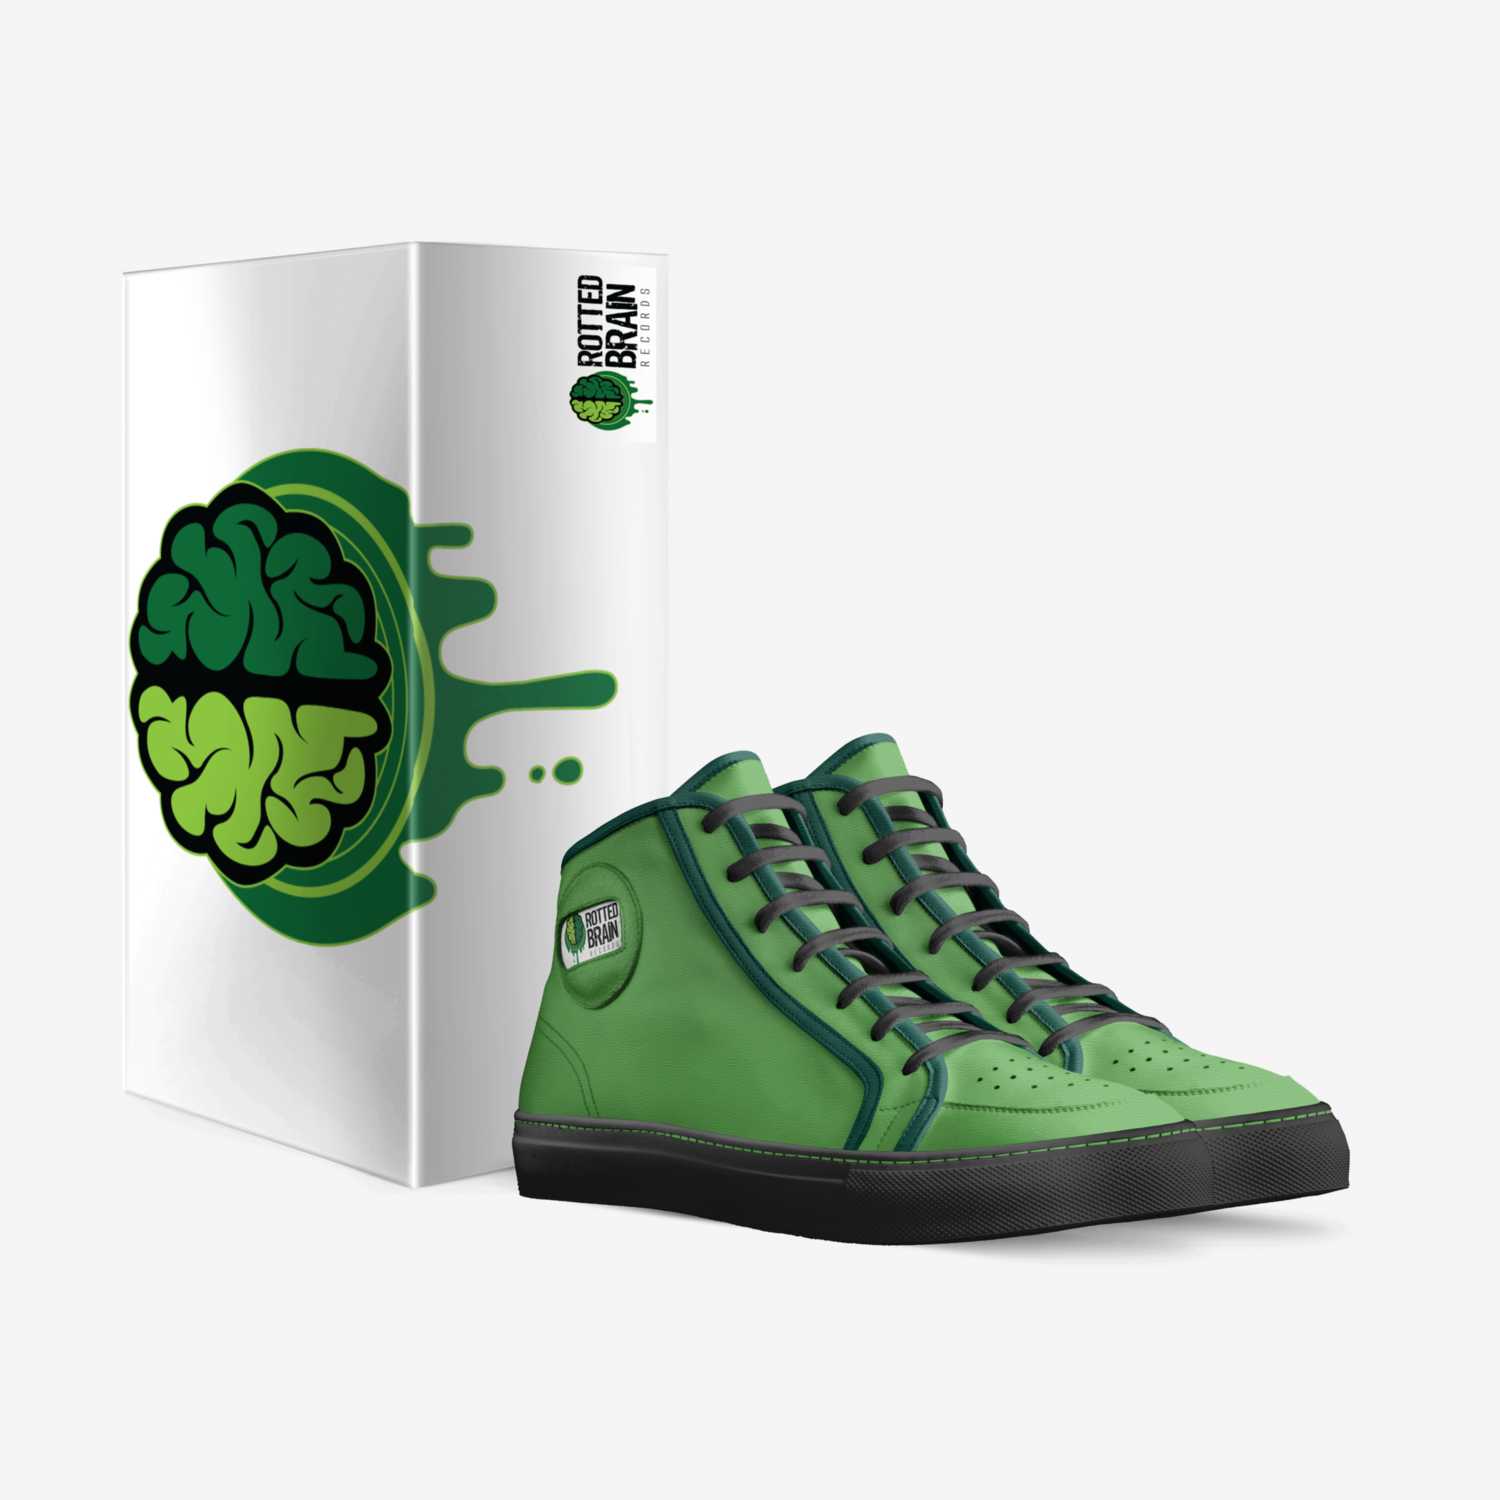 RottedBrainRecords custom made in Italy shoes by David Taylor | Box view